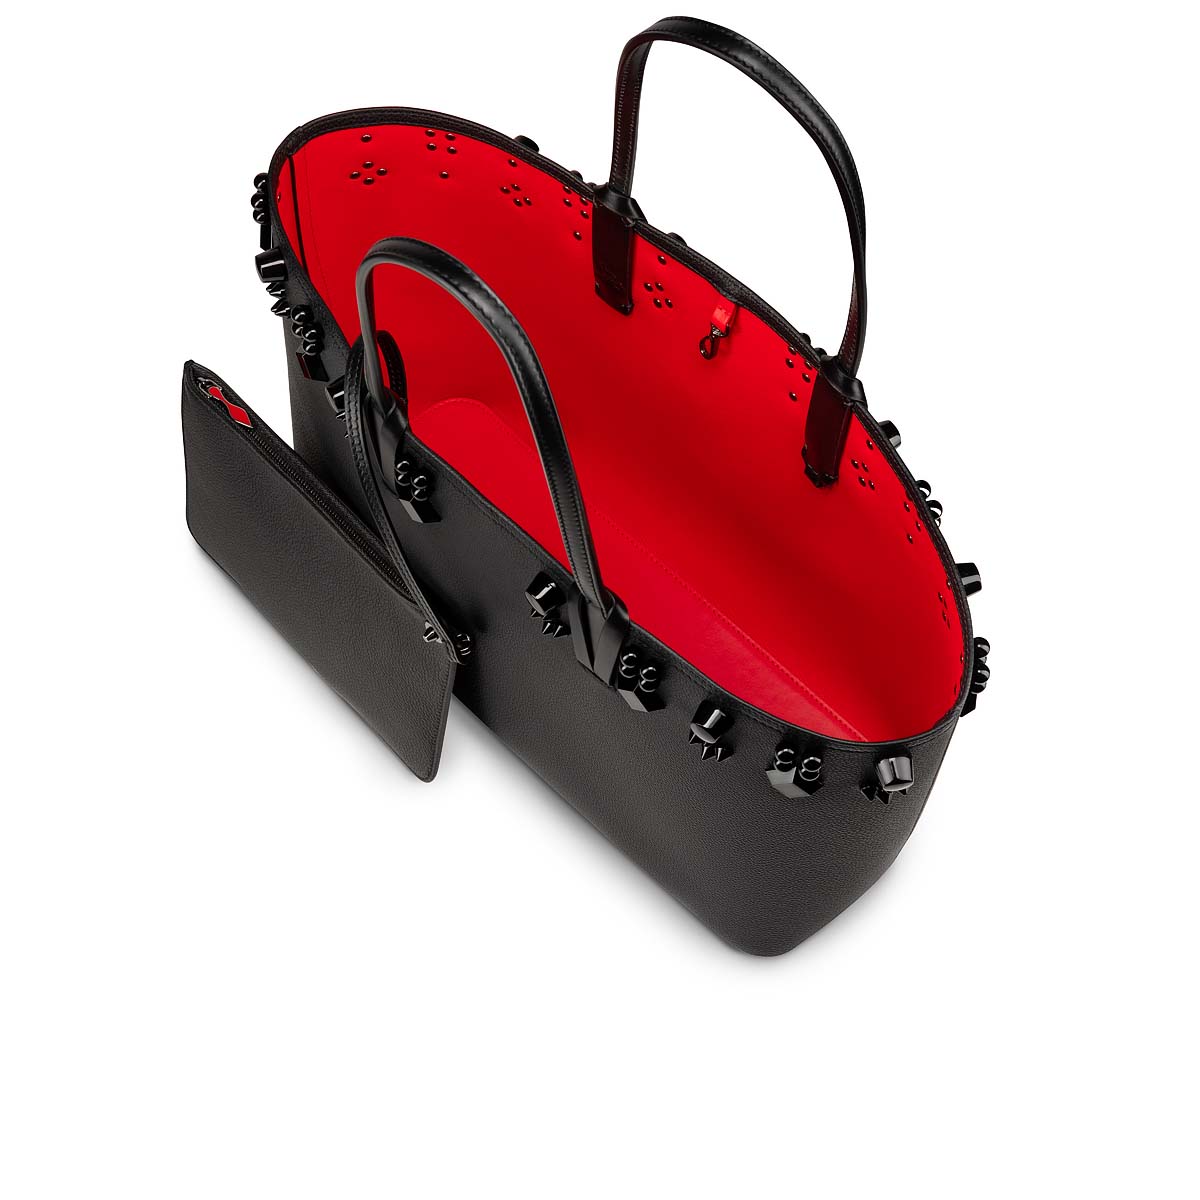 Christian Louboutin Tote Bags, Shop Christian Louboutin's Cabata tote bags  and more